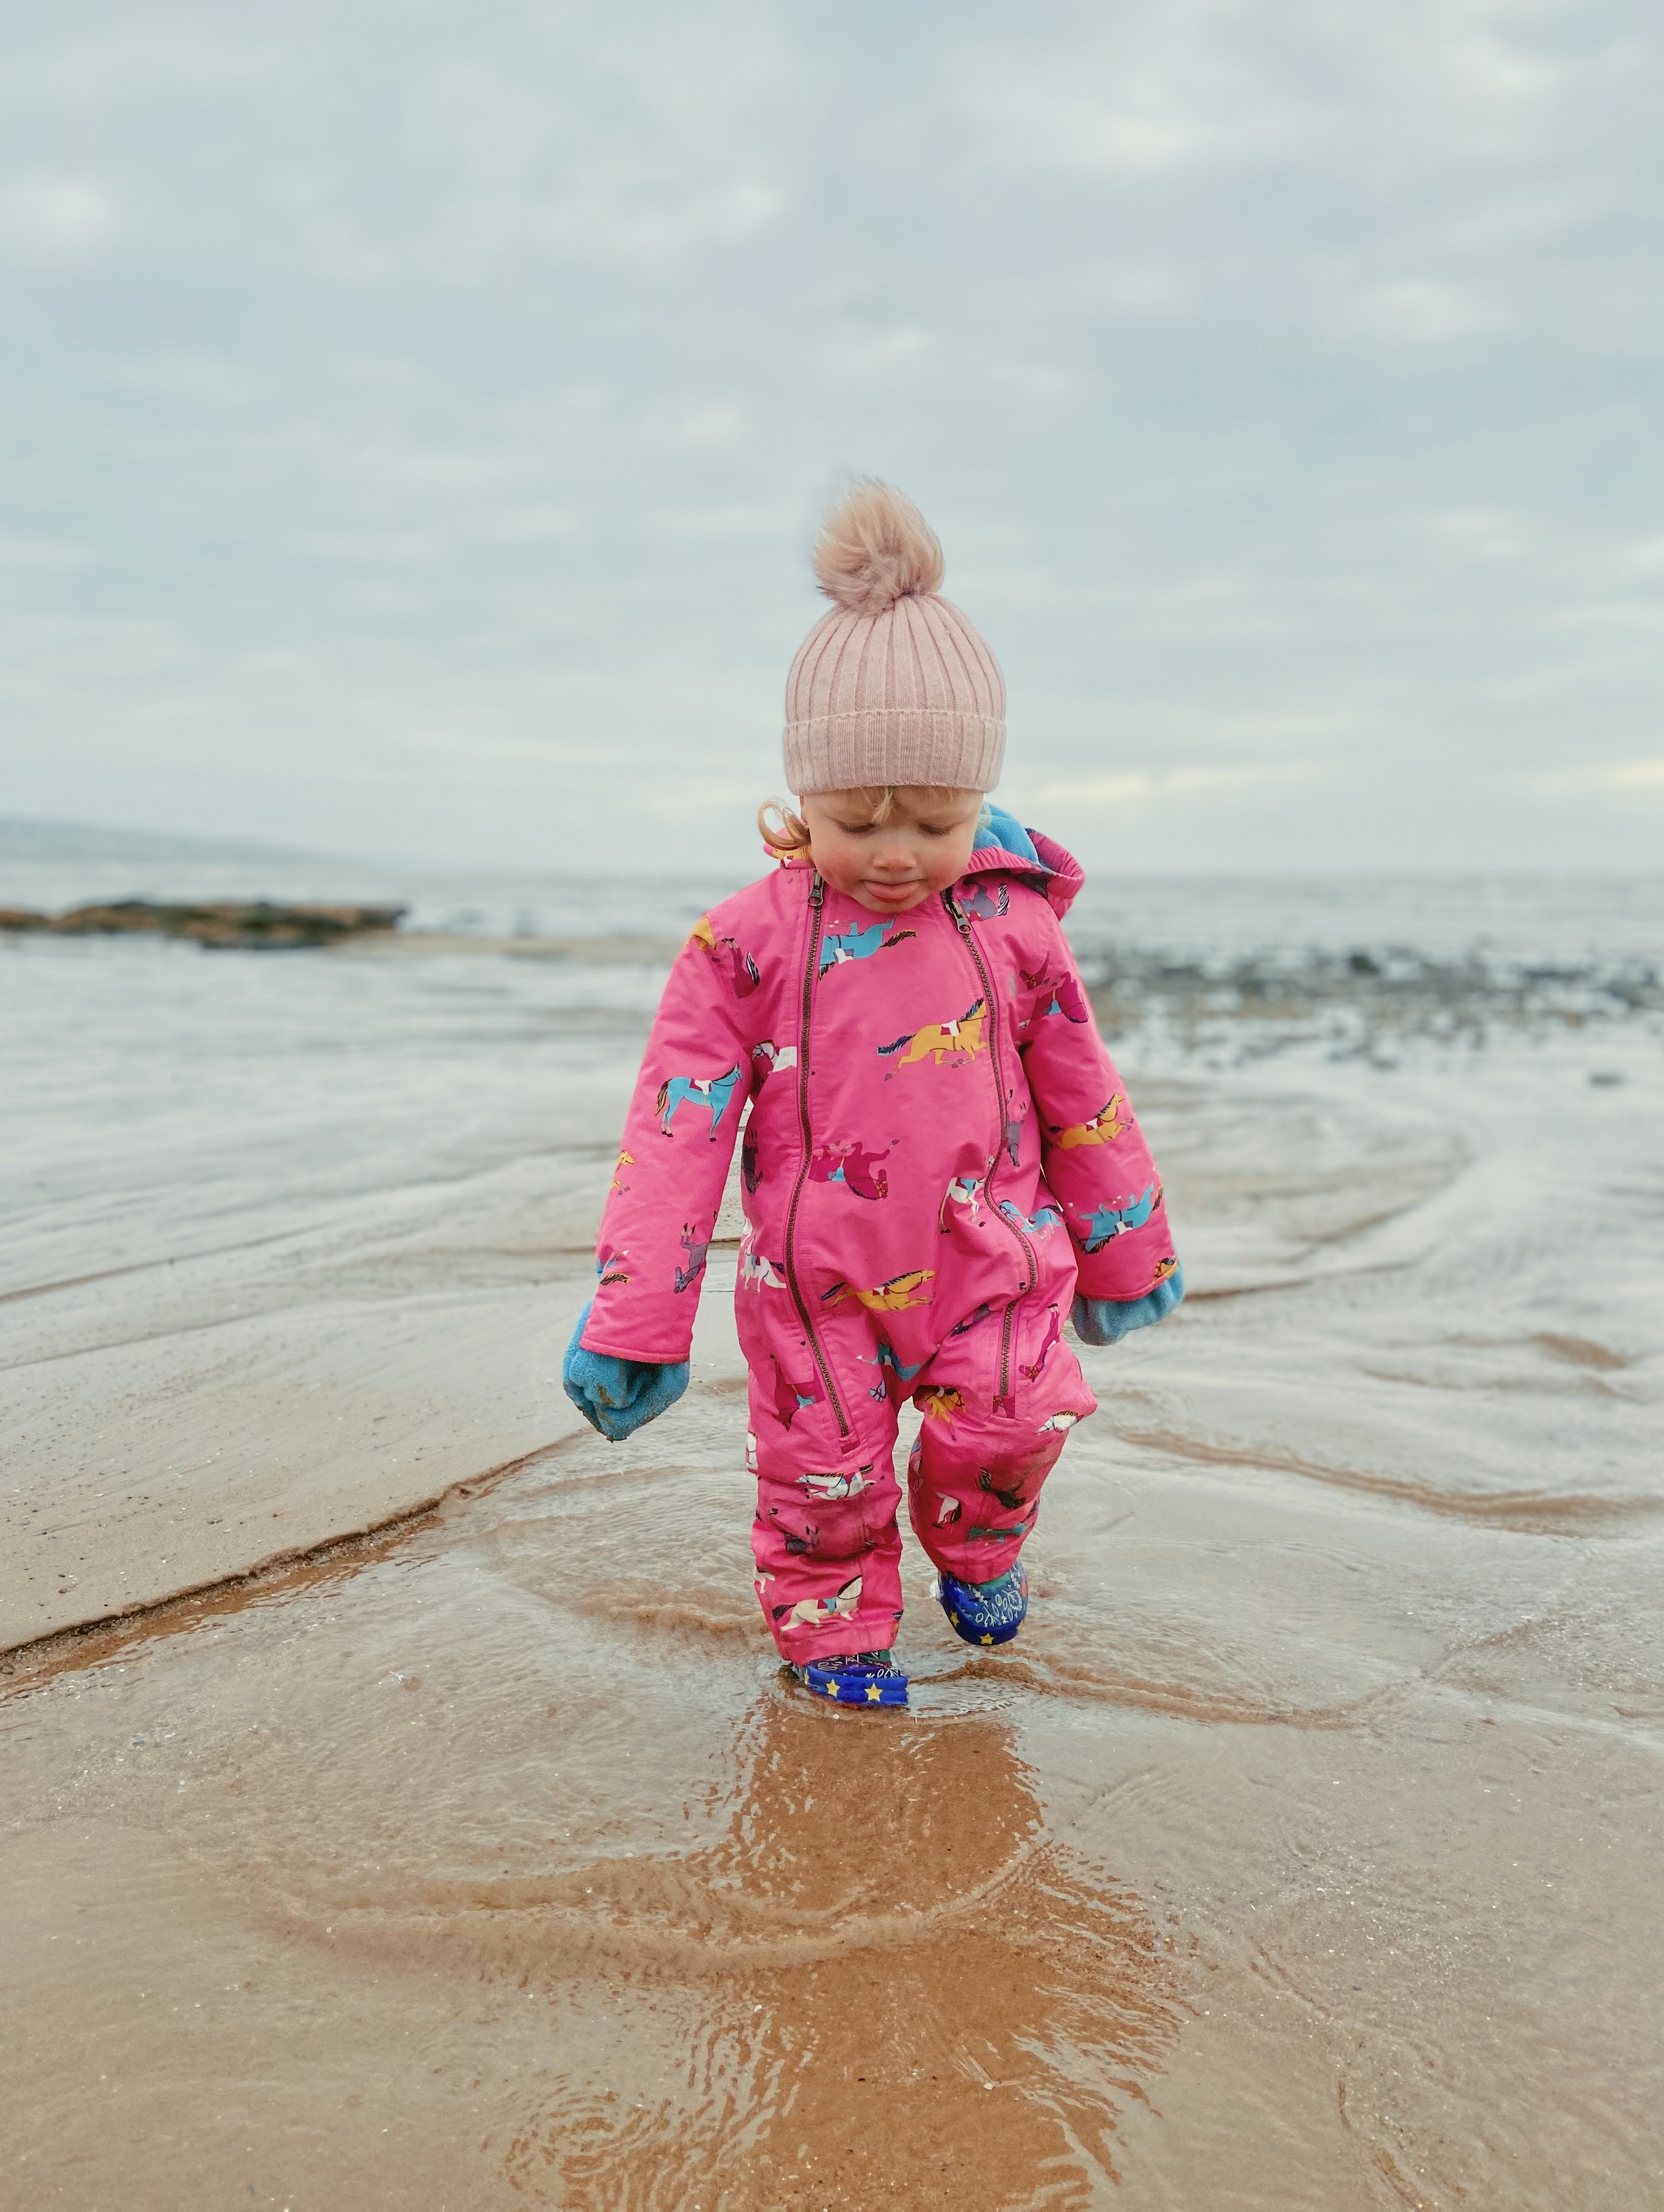 A little girl walking through the water on the beach wearing an all in one